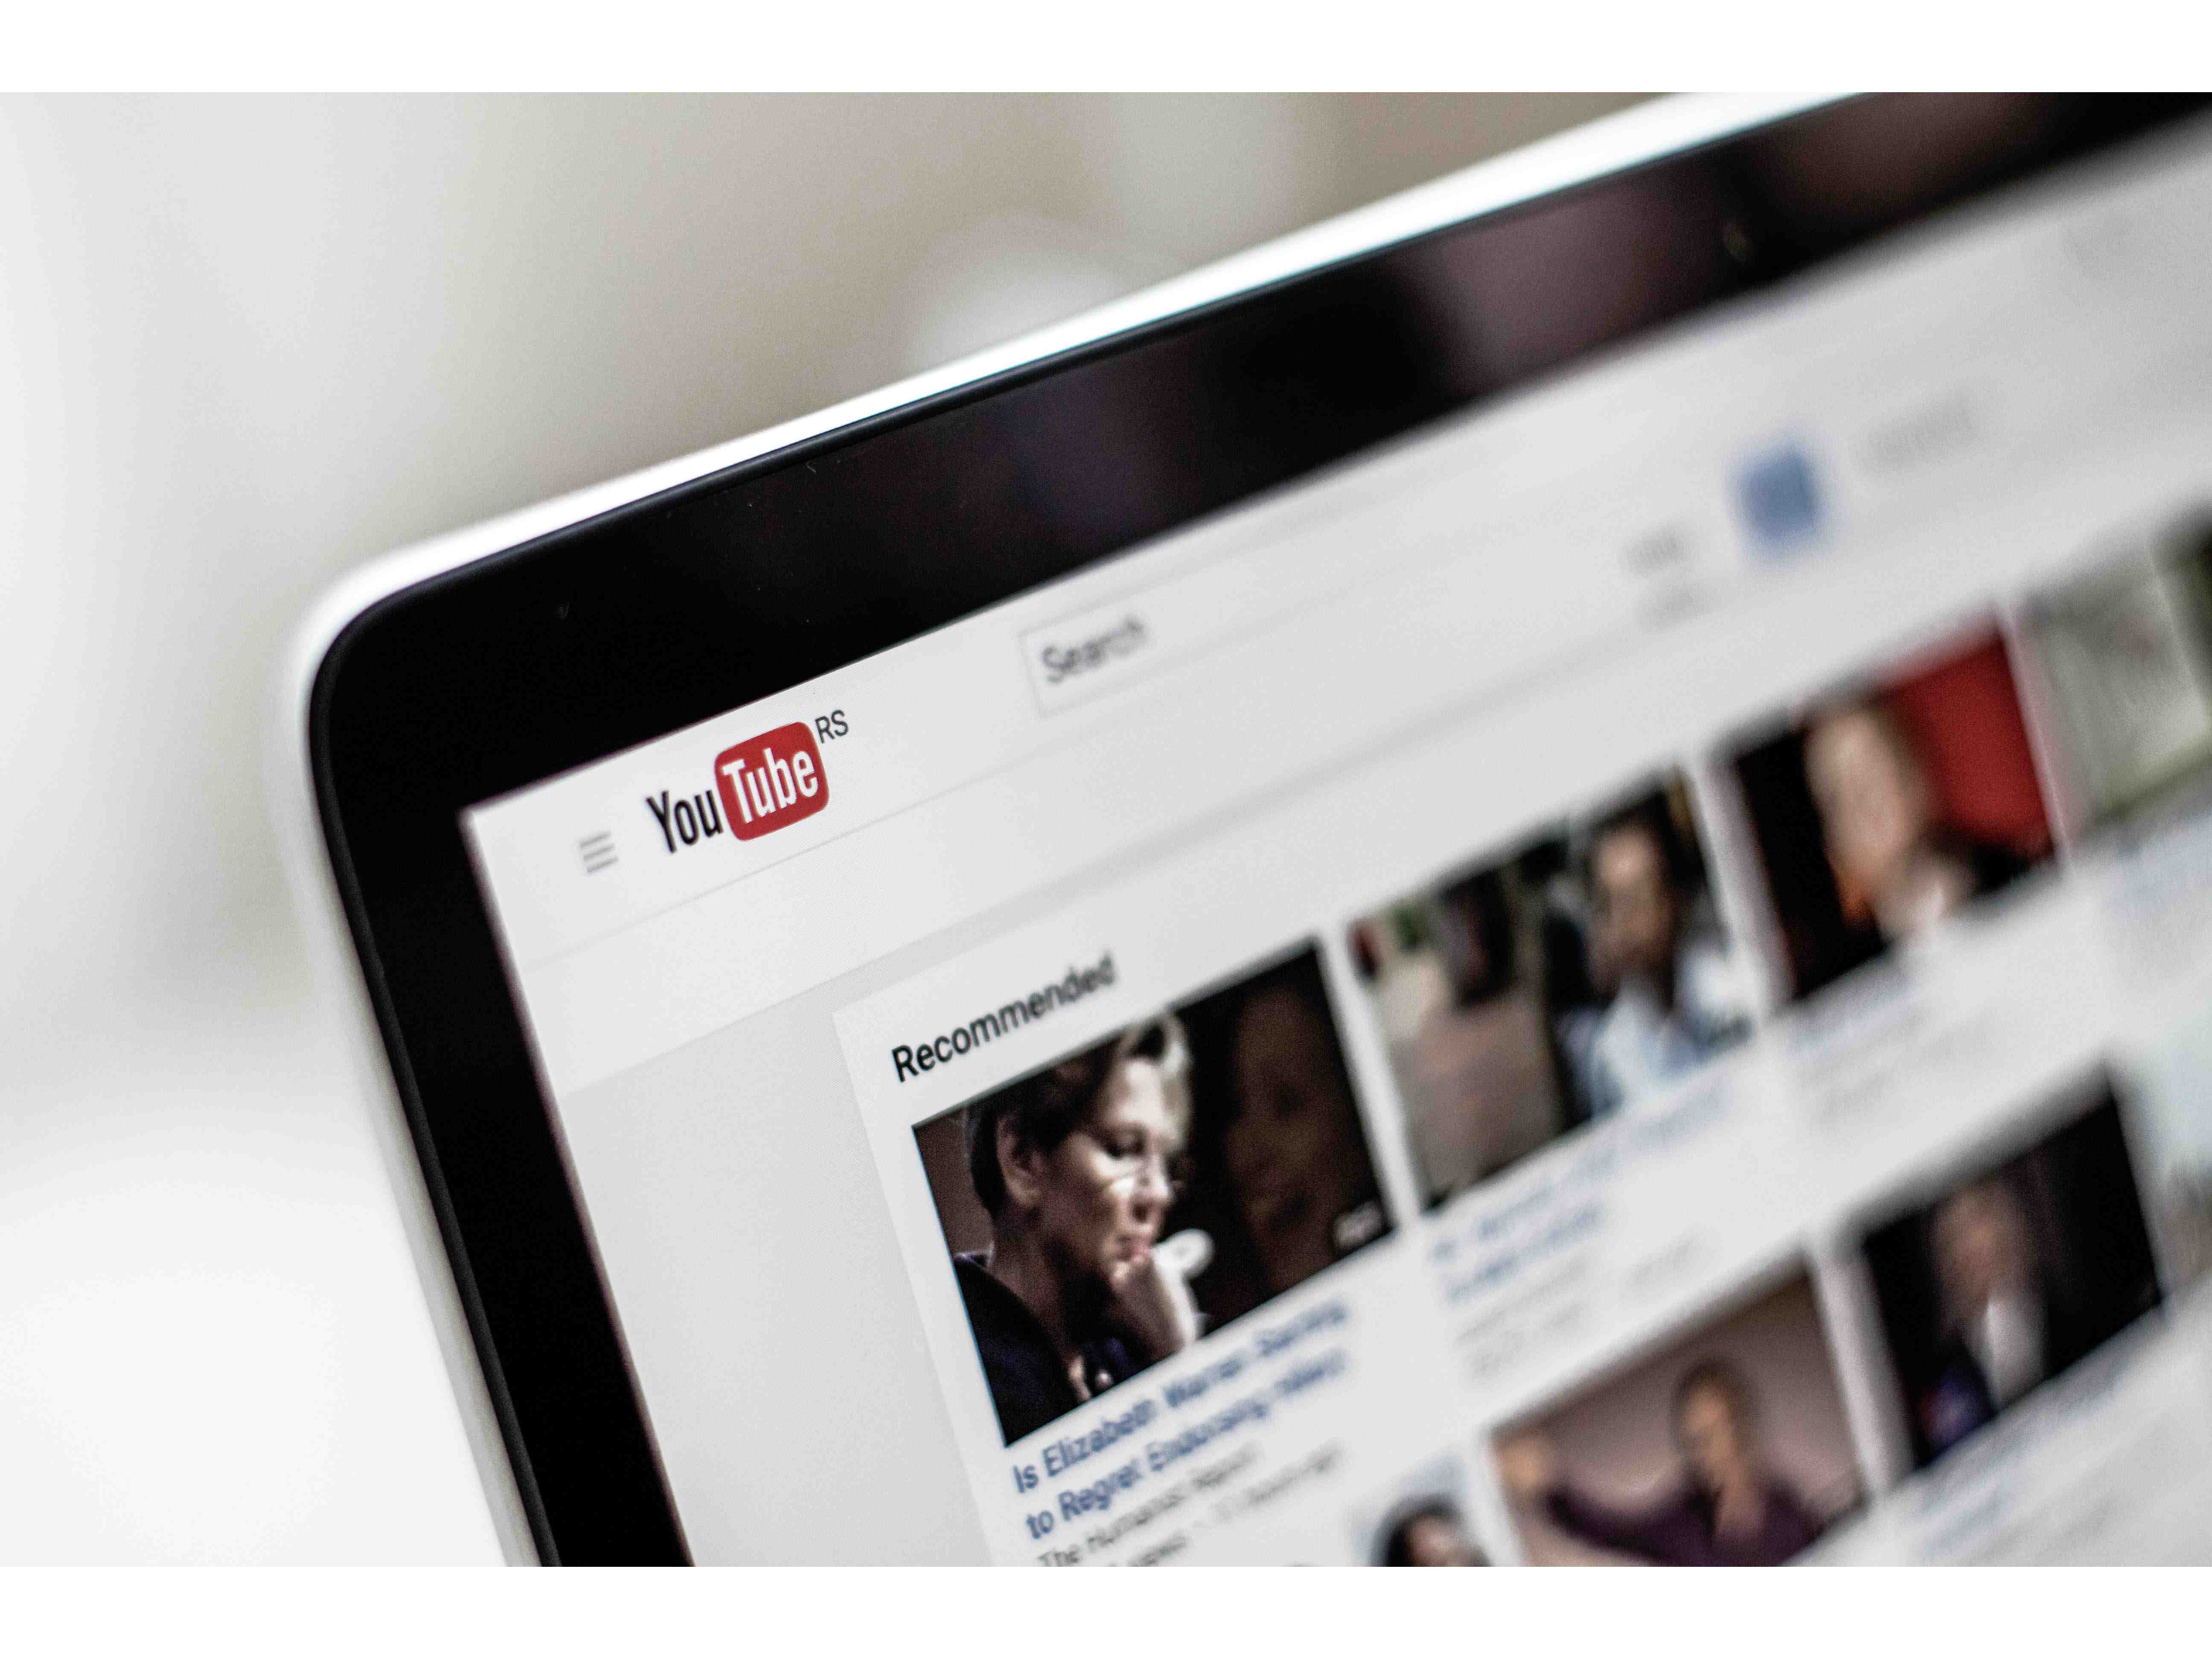 YouTube’s global advertising revenue is set to rise 4.0% in 2023 to reach $30.4bn